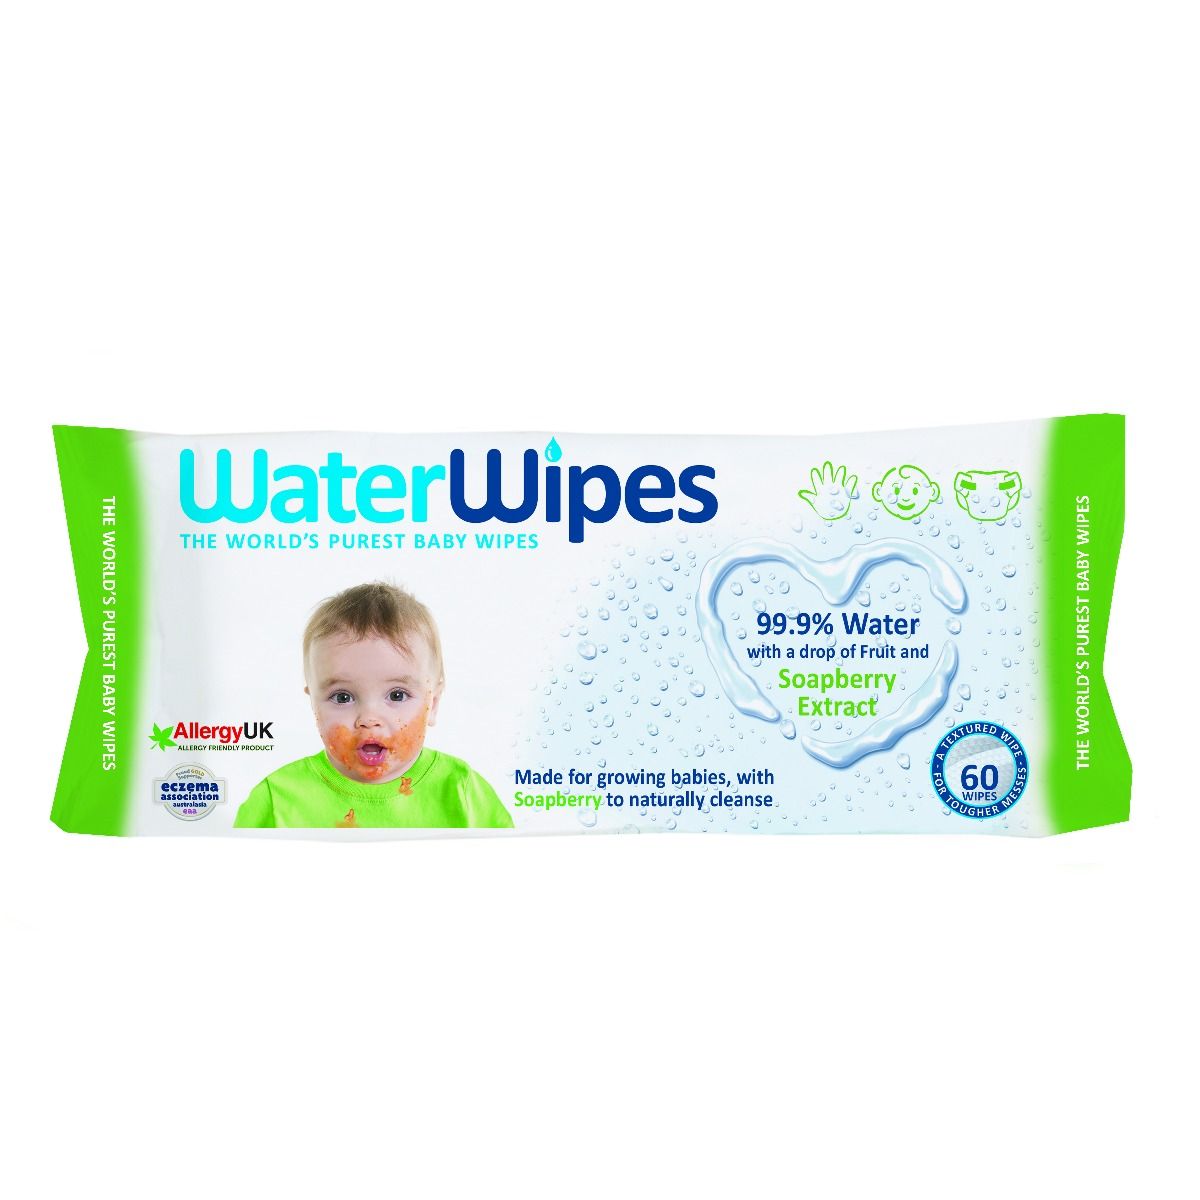 Buy WaterWipes Soapberry Extract Baby Wipes, 60 Count Online